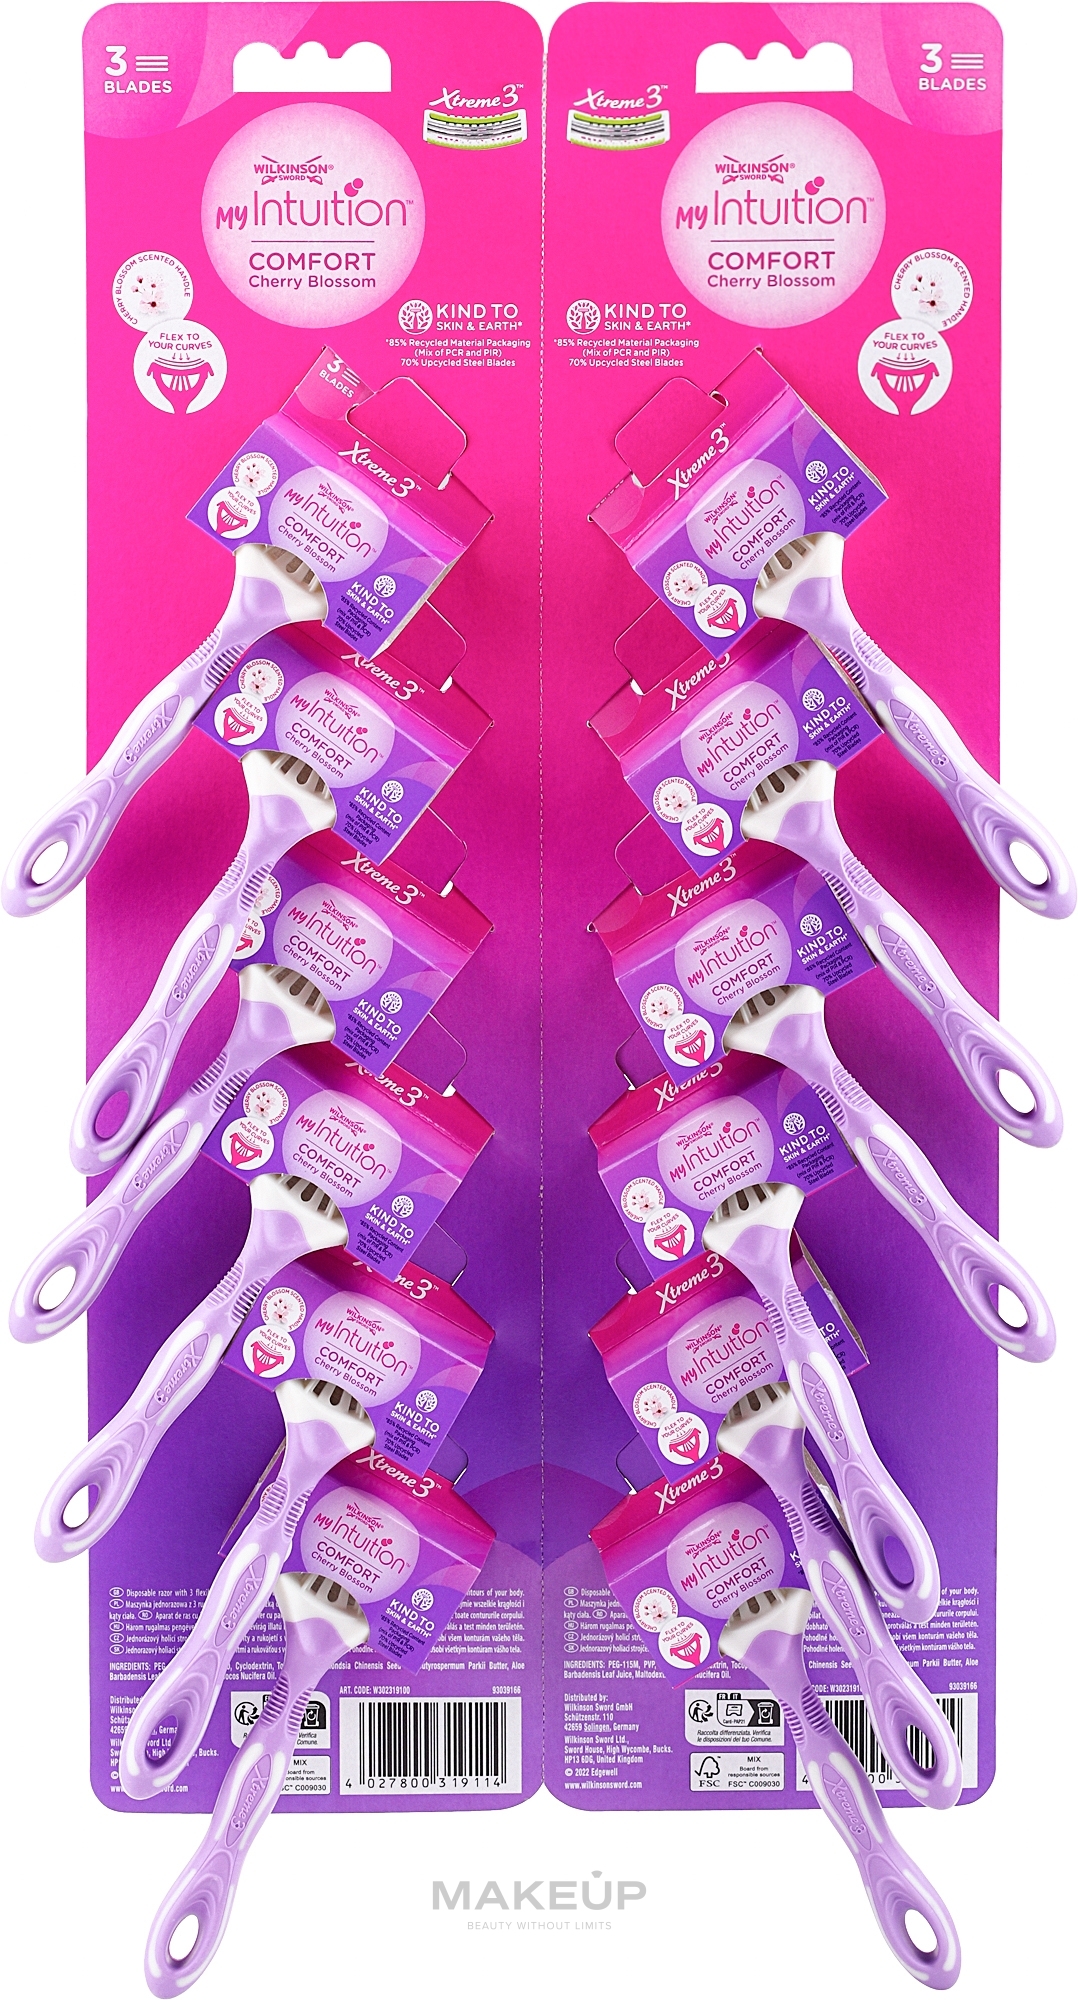 Women Disposable Razors with Three Blades, 12 pcs. - Wilkinson Sword Xtreme 3 My Intuition Comfort Cherry Blossom — photo 12 szt.